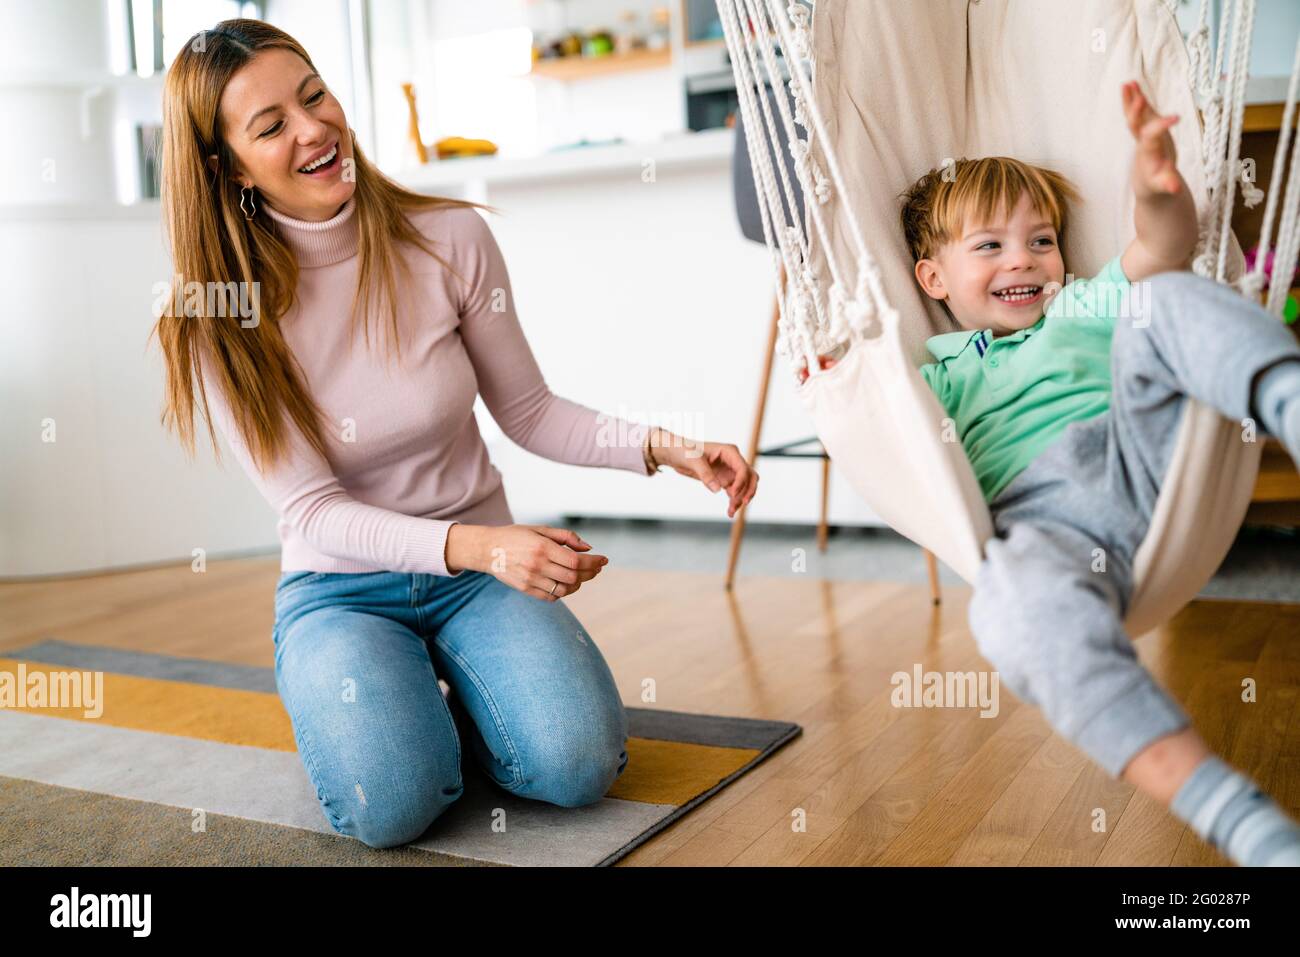 Joyful toddler boy having fun, playing with his mother together at home. Stock Photo